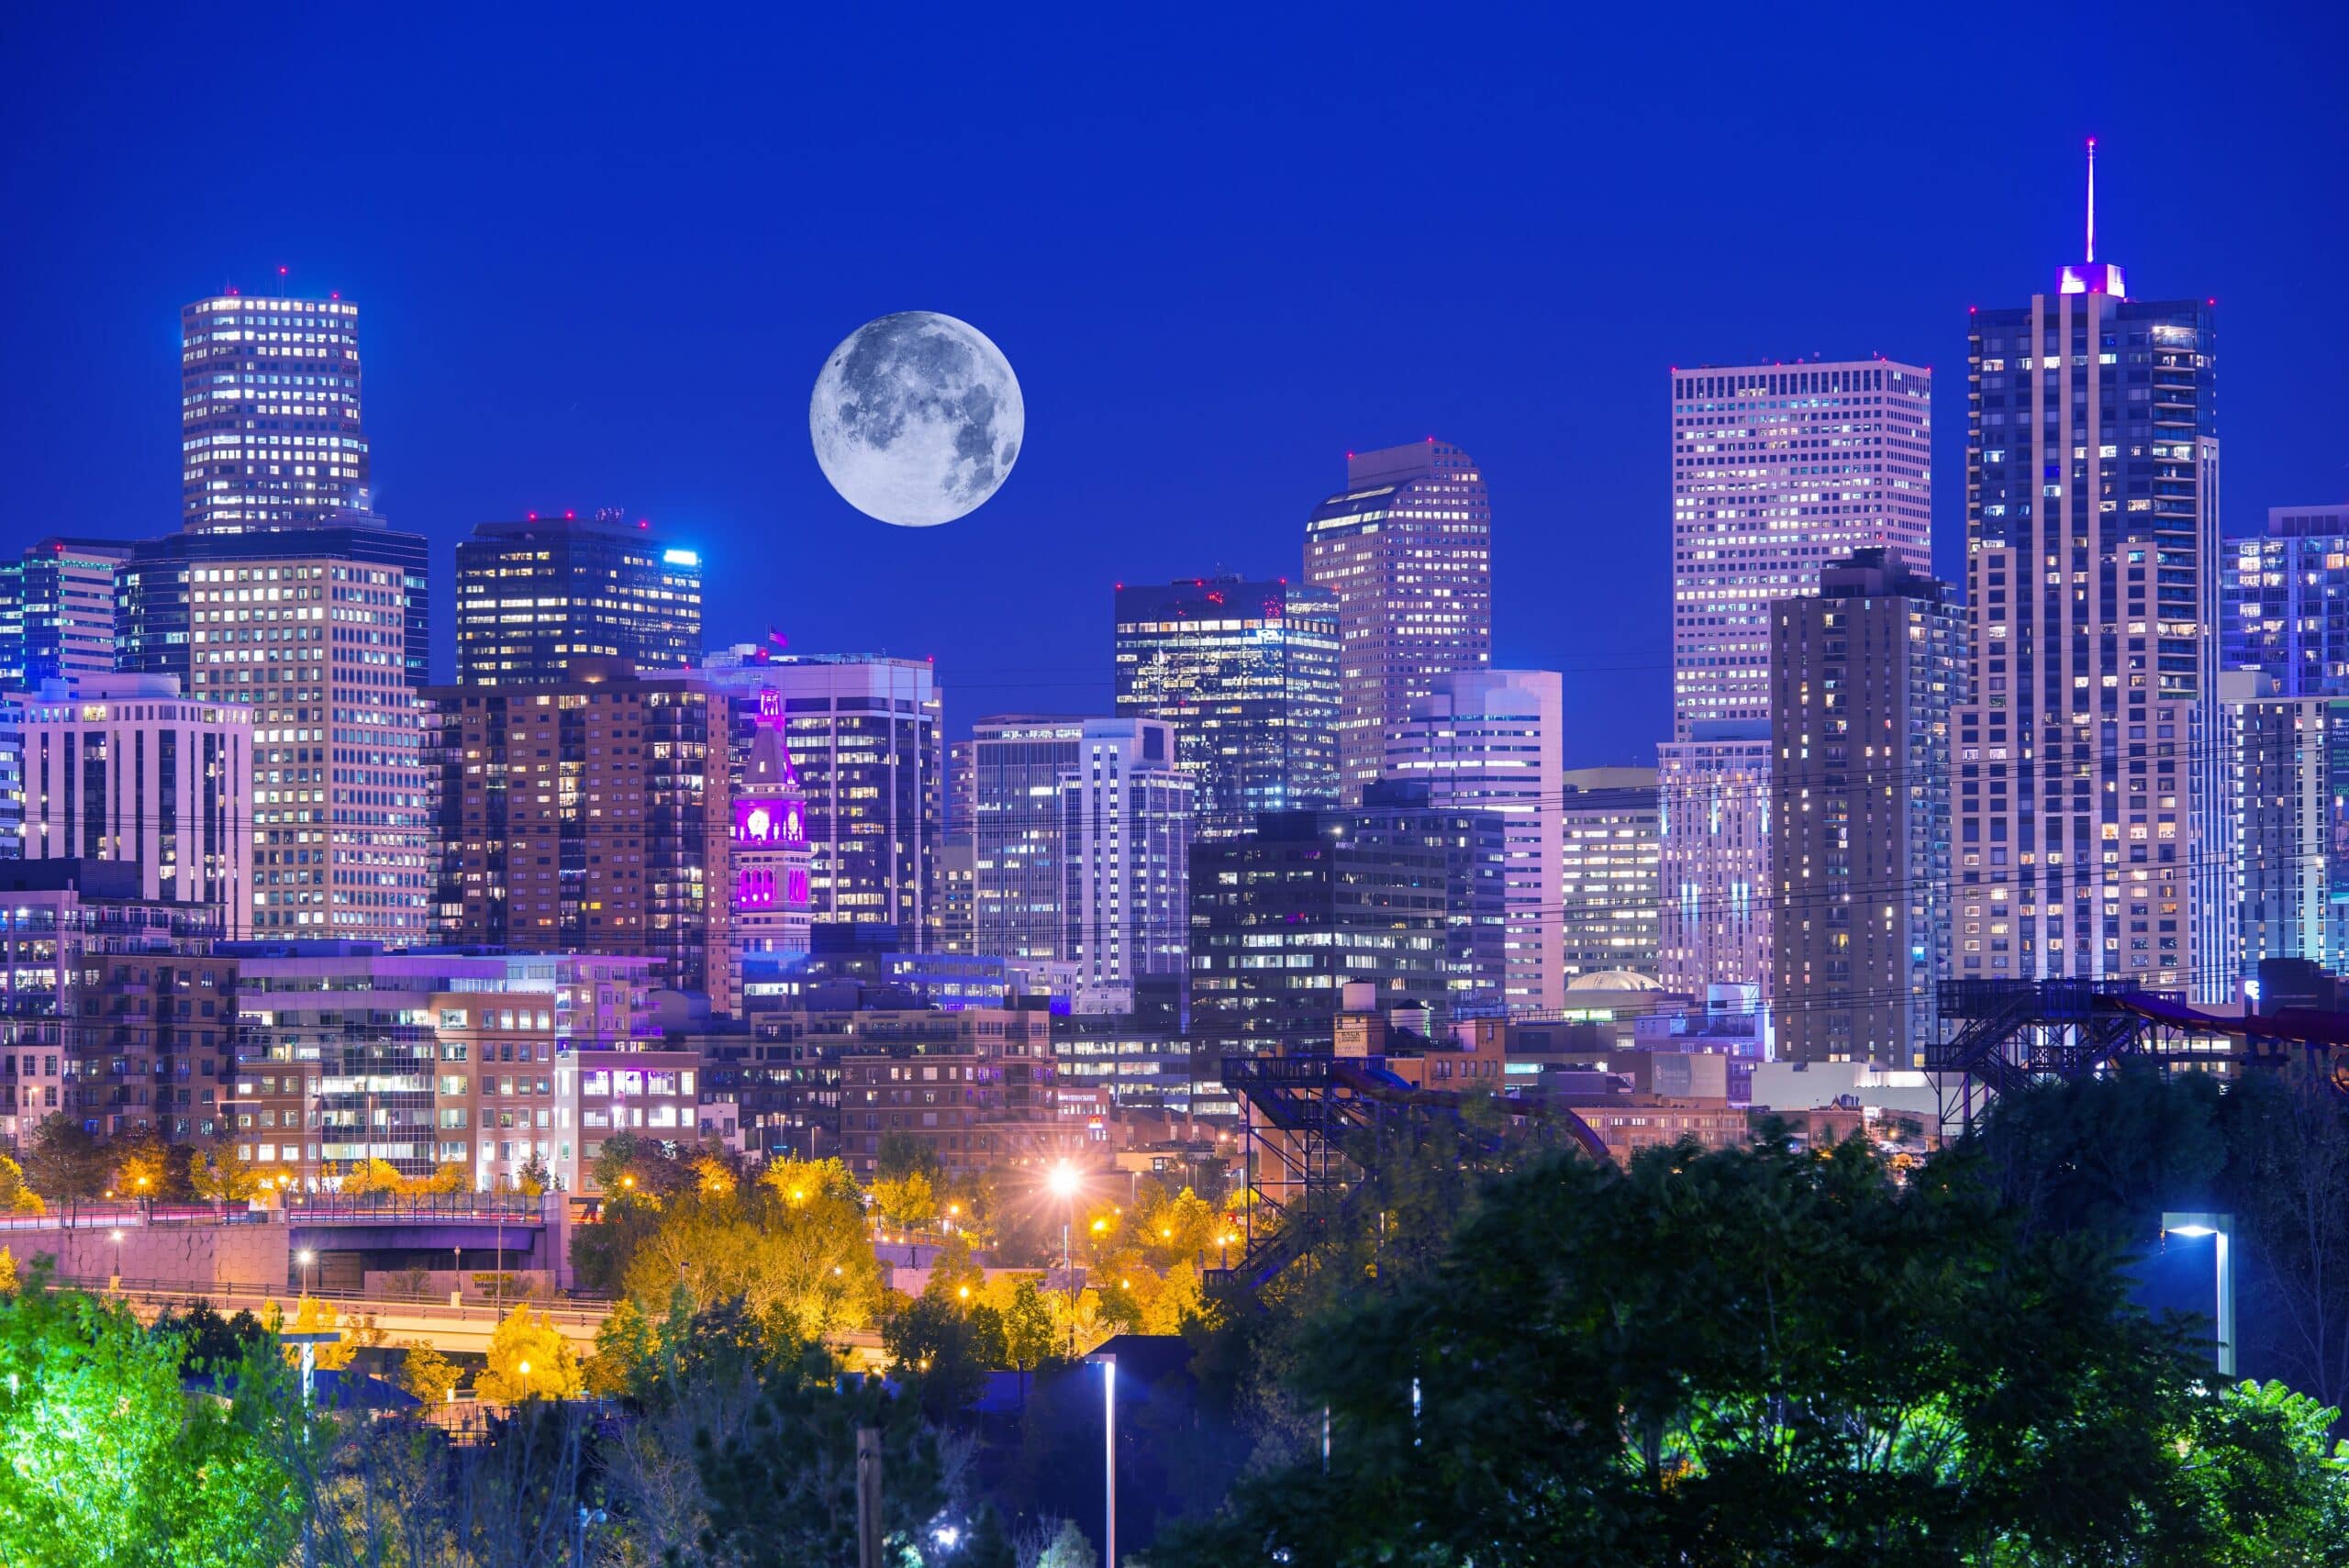 Denver Colorado at Night. Denver Downtown Skyline and the Full Moon on Clear Sky.